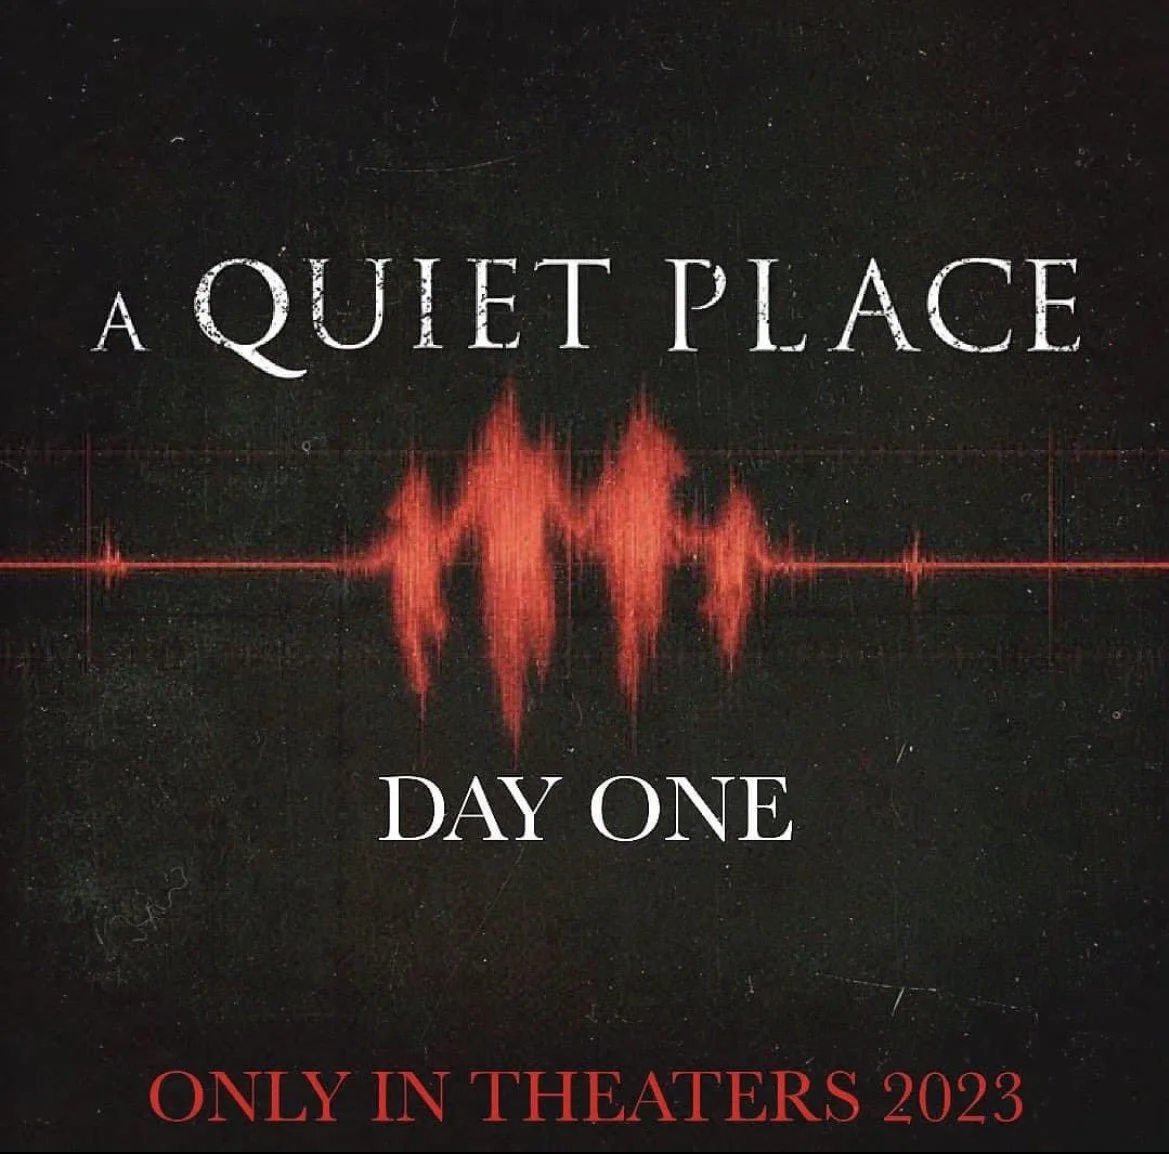 The spinoff of "A Quiet Place" titled "A Quiet Place: Day One‎"